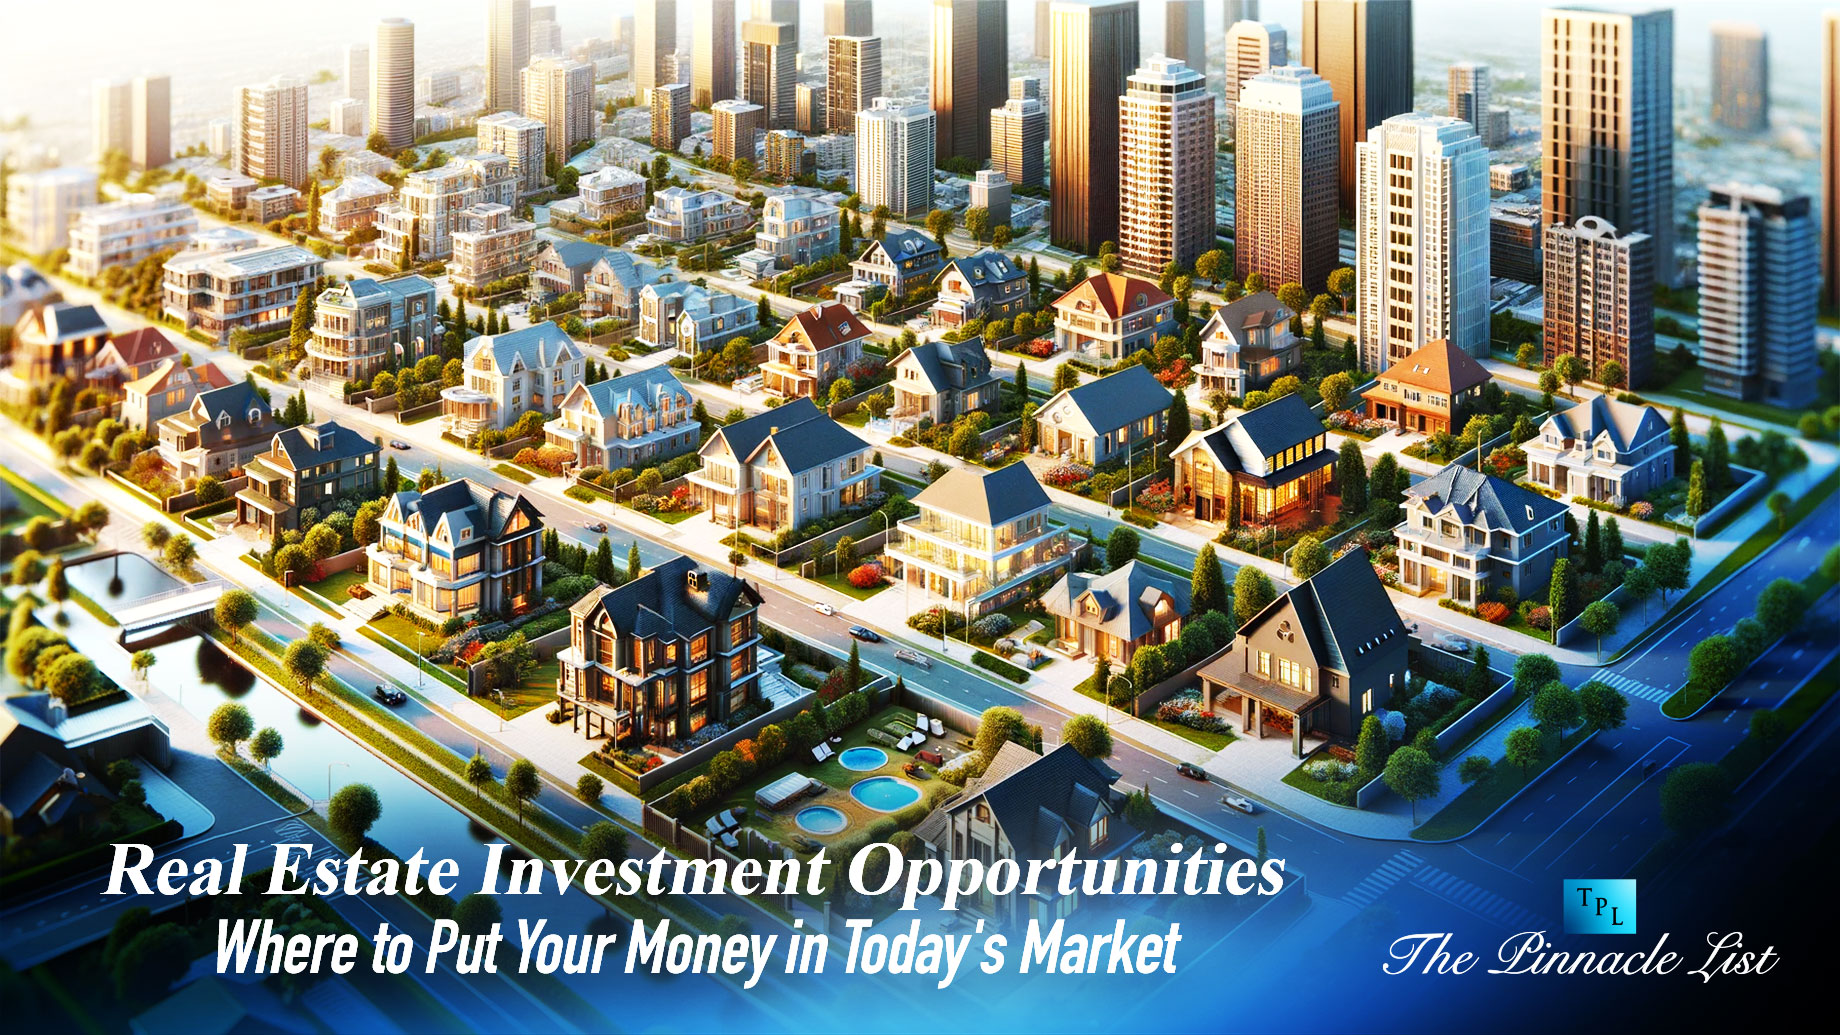 Real Estate Investment Opportunities: Where to Put Your Money in Today's Market